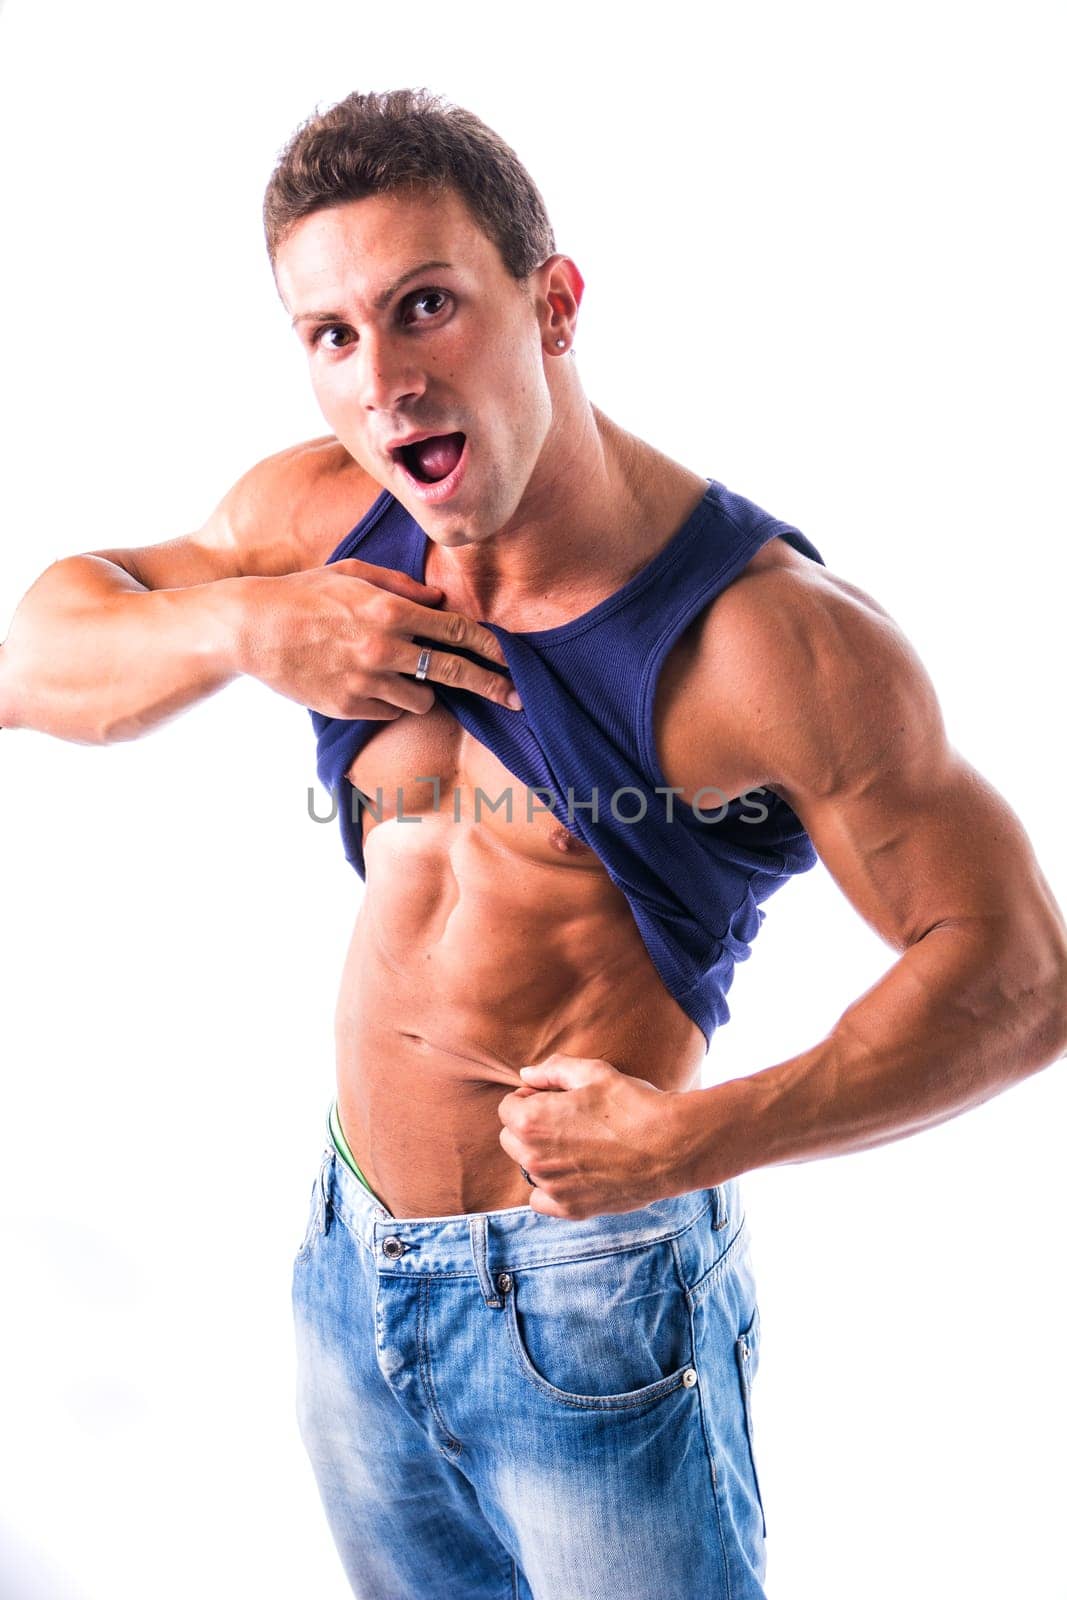 Fit, athletic muscular young man pinching his stomach skin and showing abs in studio shot isolated on white